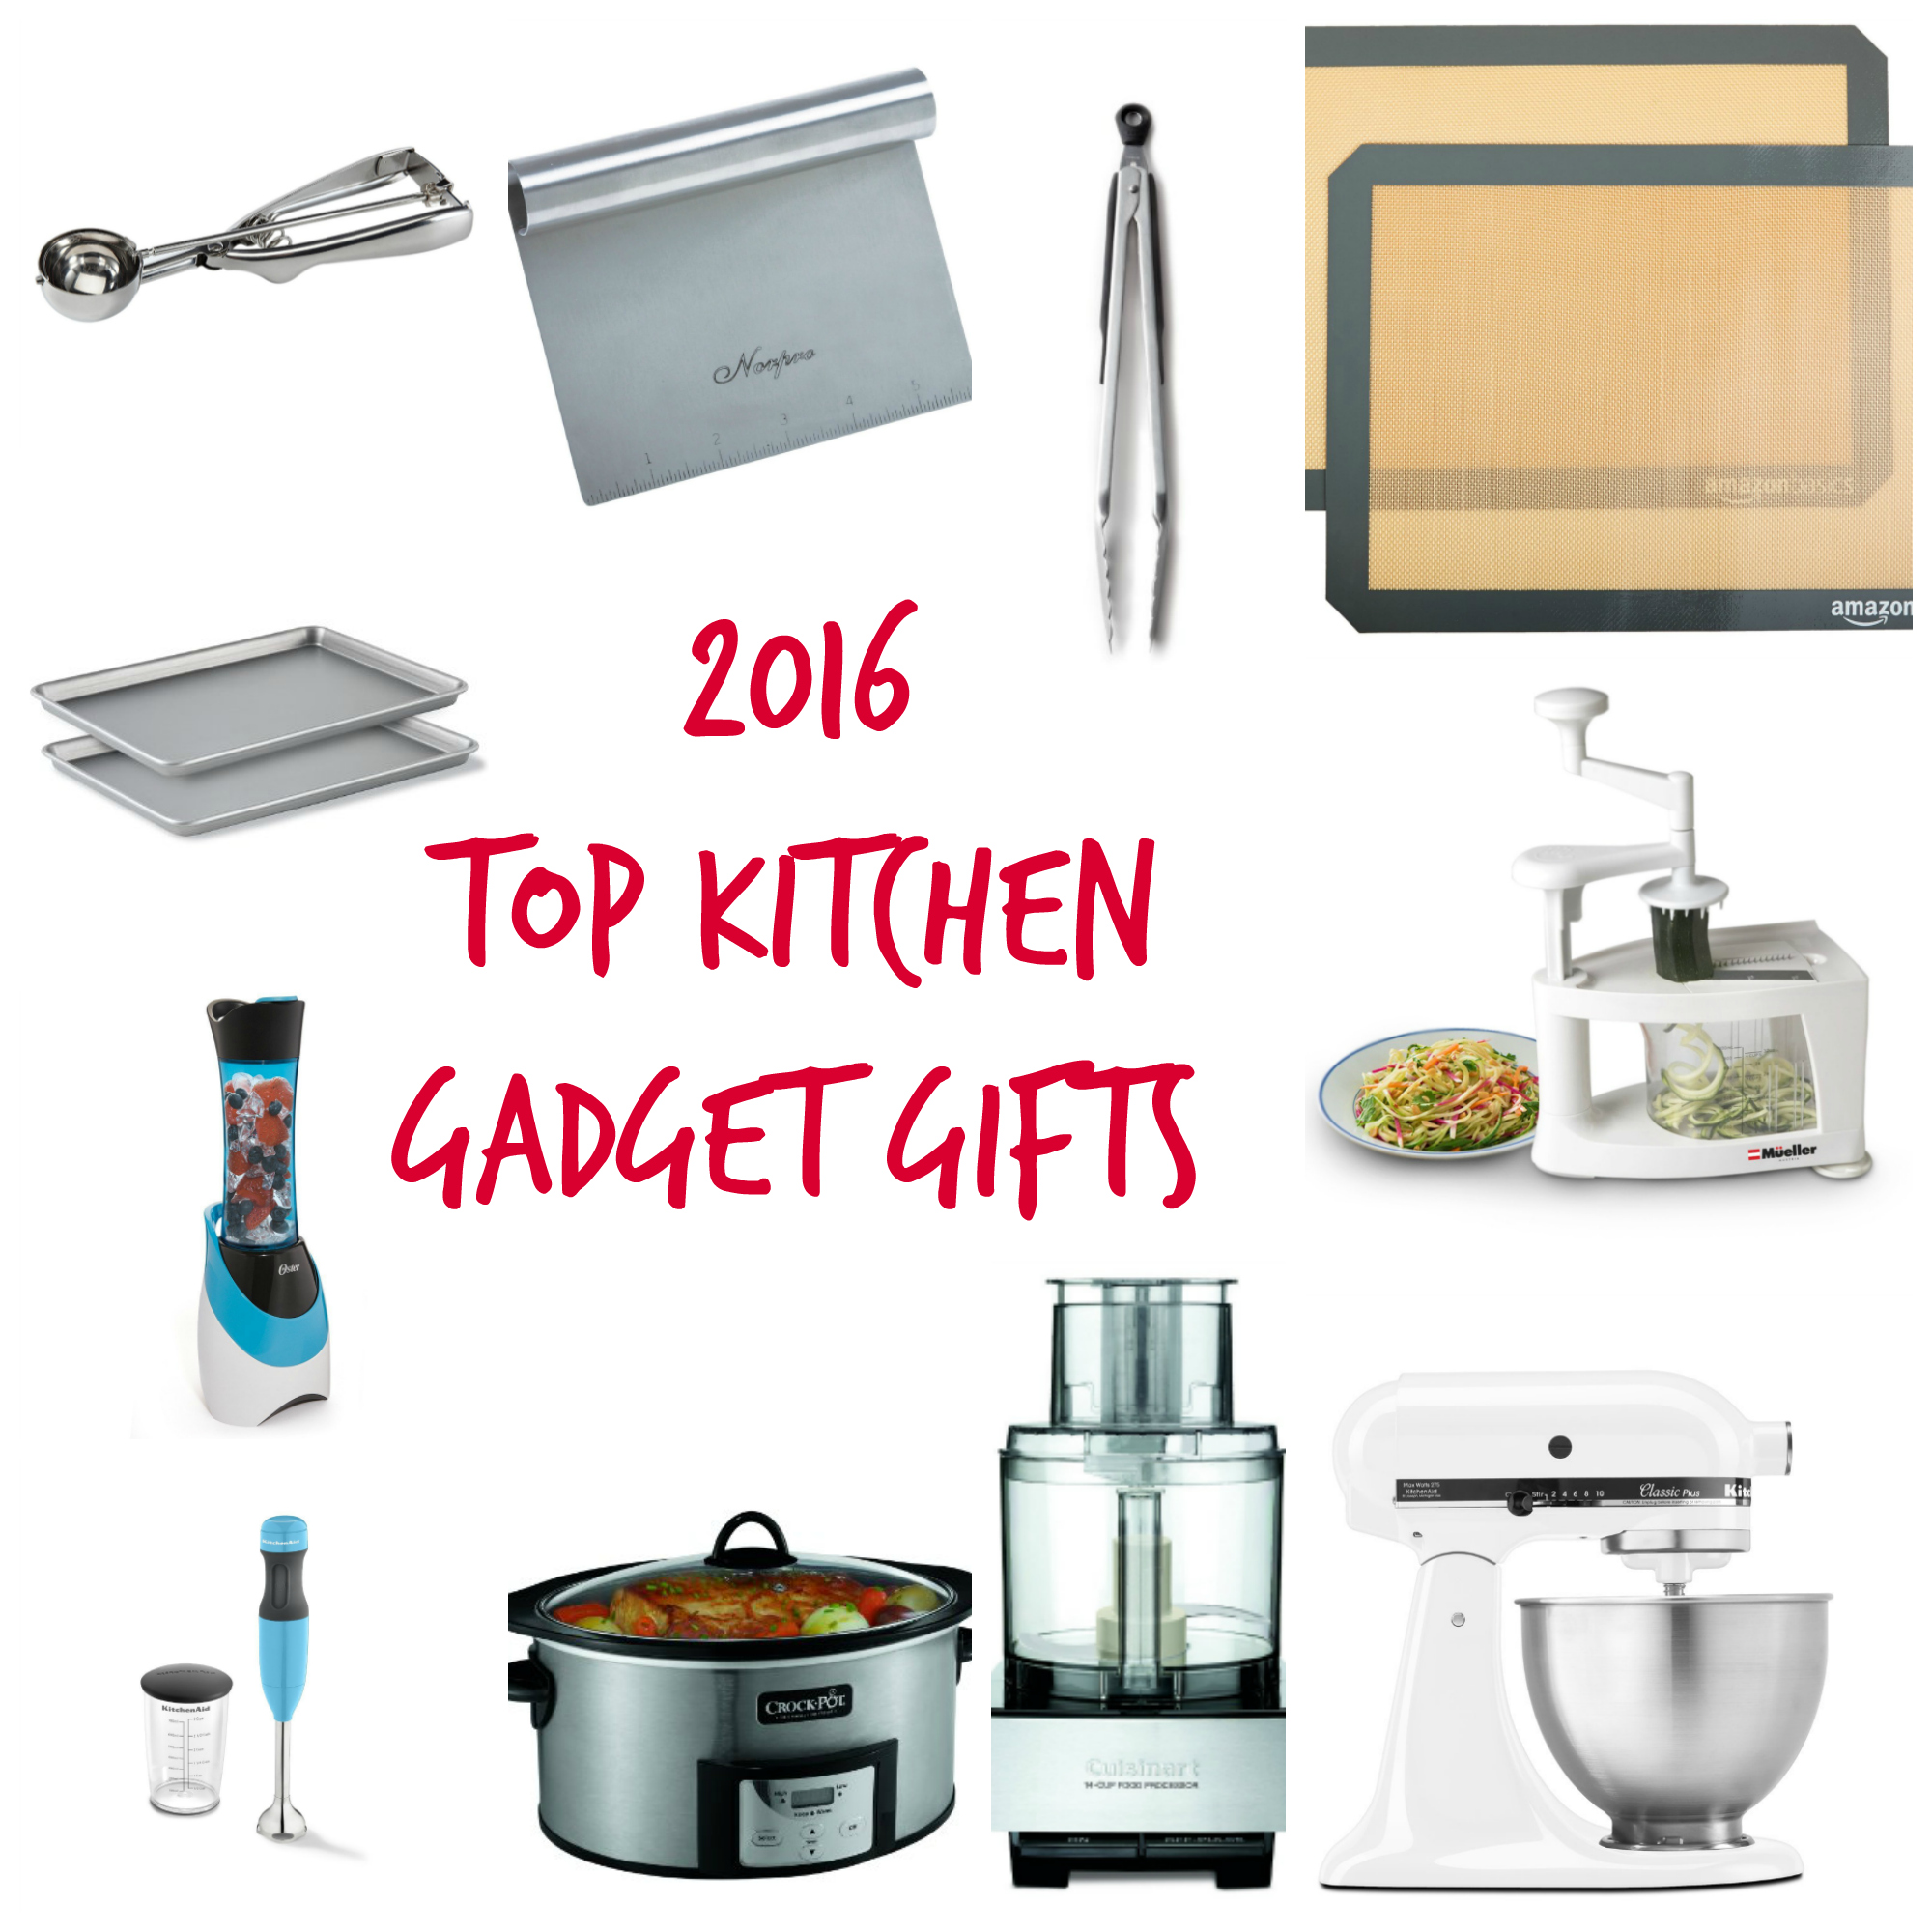 2016-top-kitchen-gadget-gifts-collage